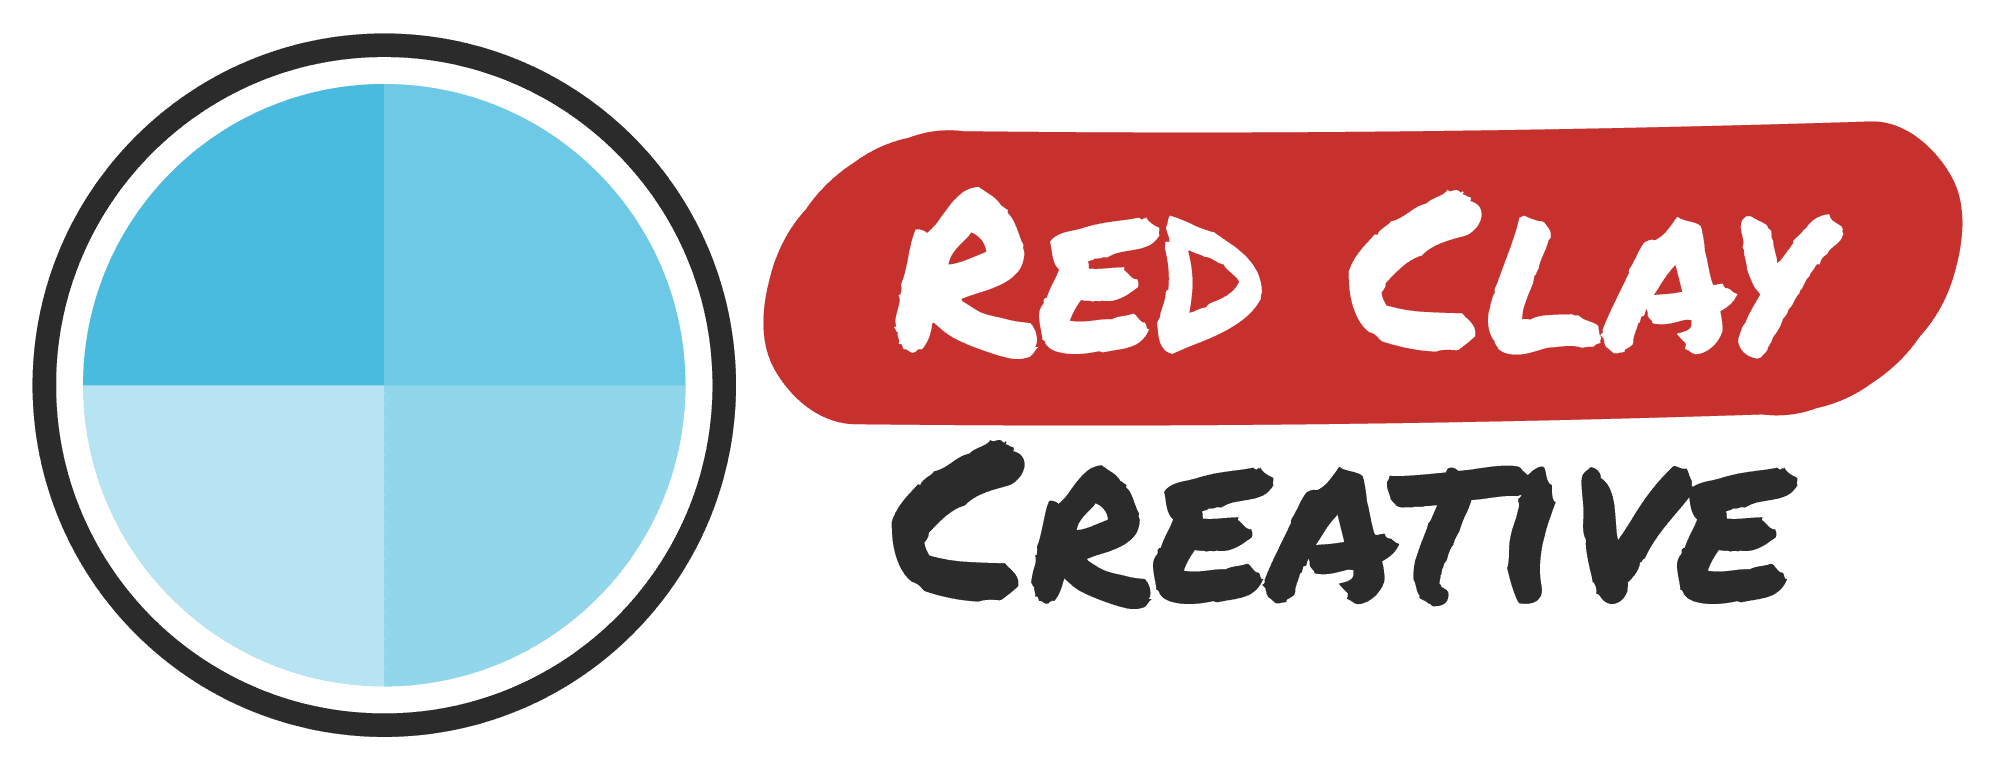 Red Clay Creative